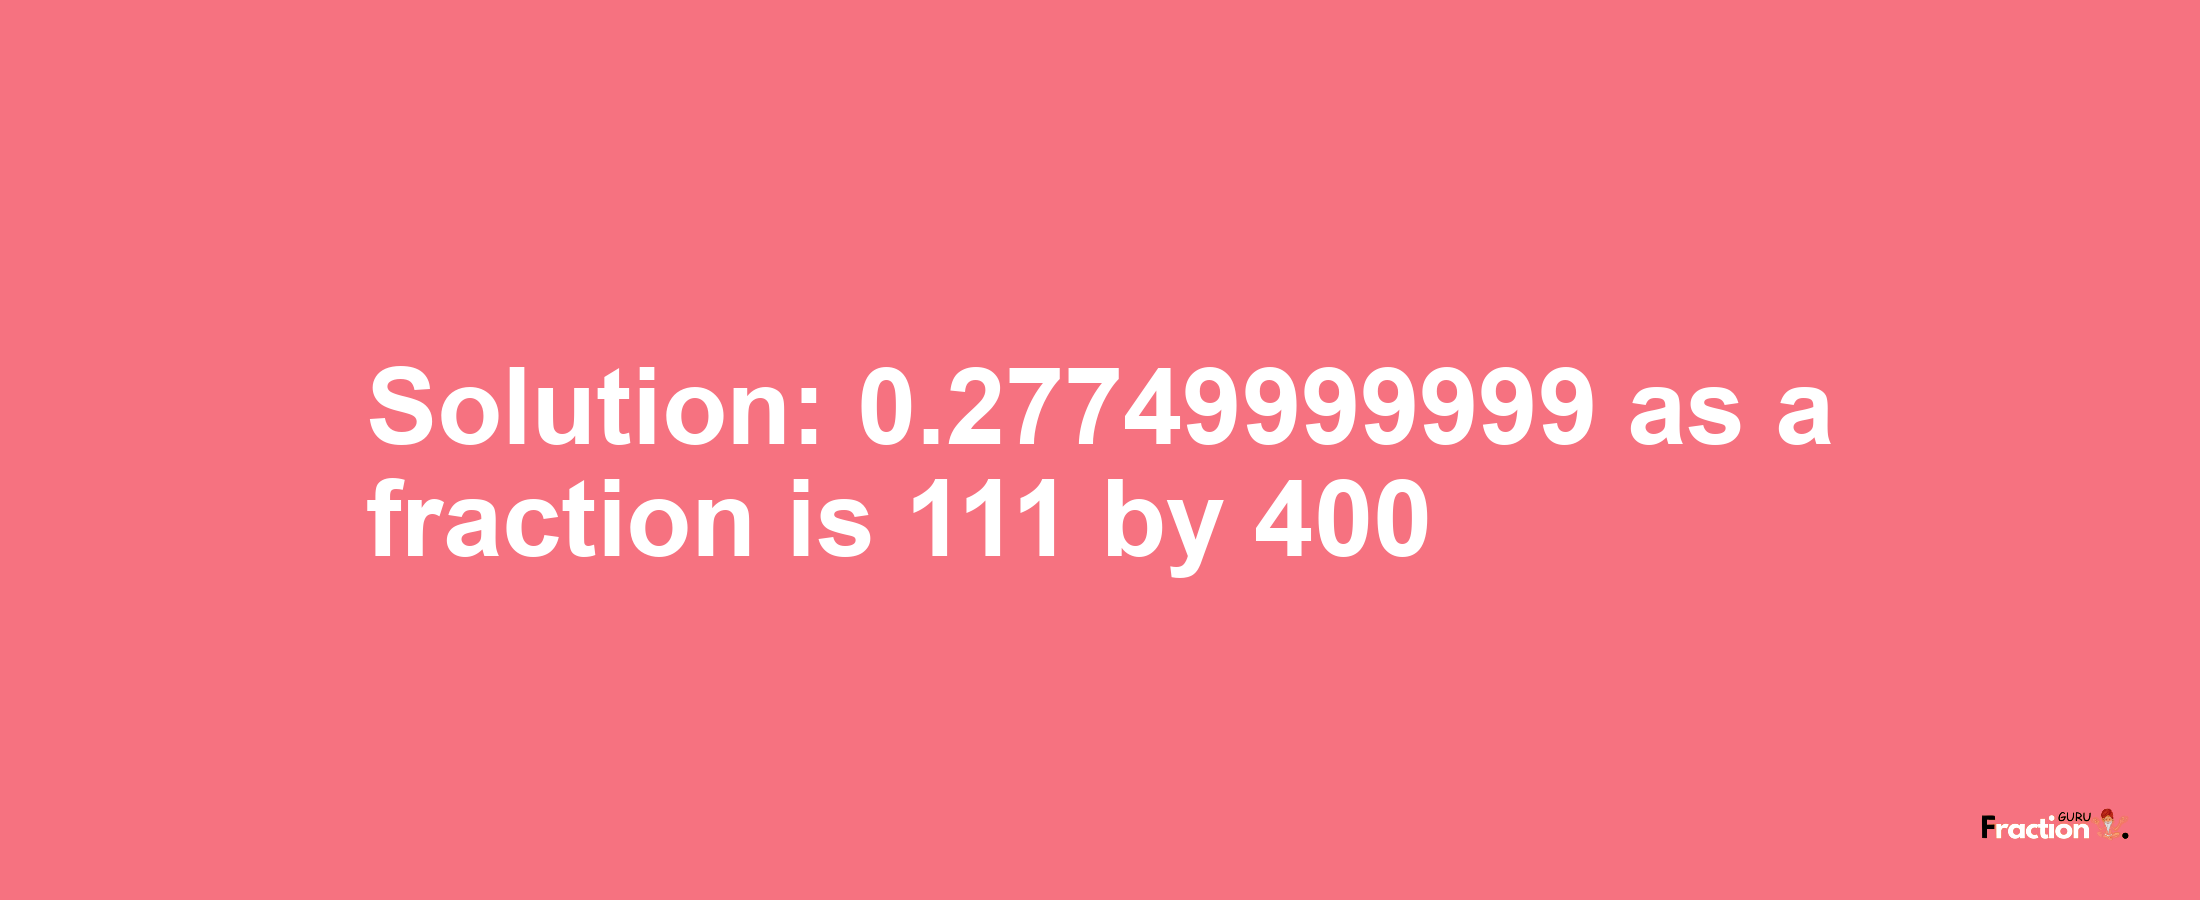 Solution:0.27749999999 as a fraction is 111/400